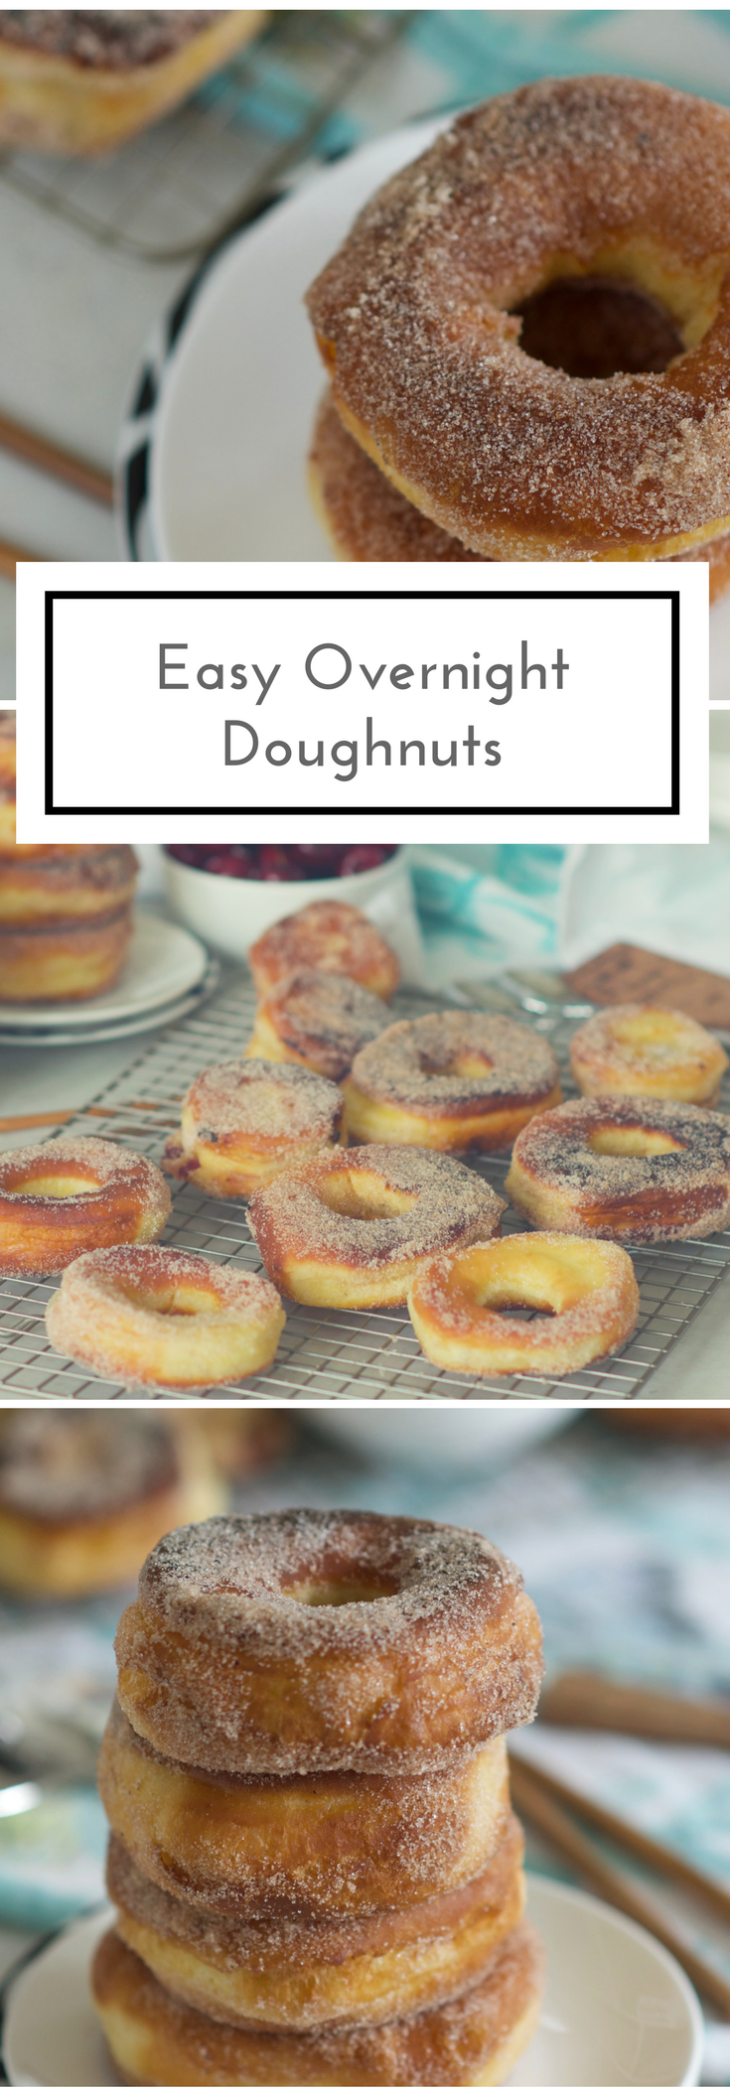 Easy Overnight Doughnuts: Fresh, homemade doughnuts are simple to make with this basic recipe. Enjoy with cinnamon sugar, or fill with chopped, fresh cherries